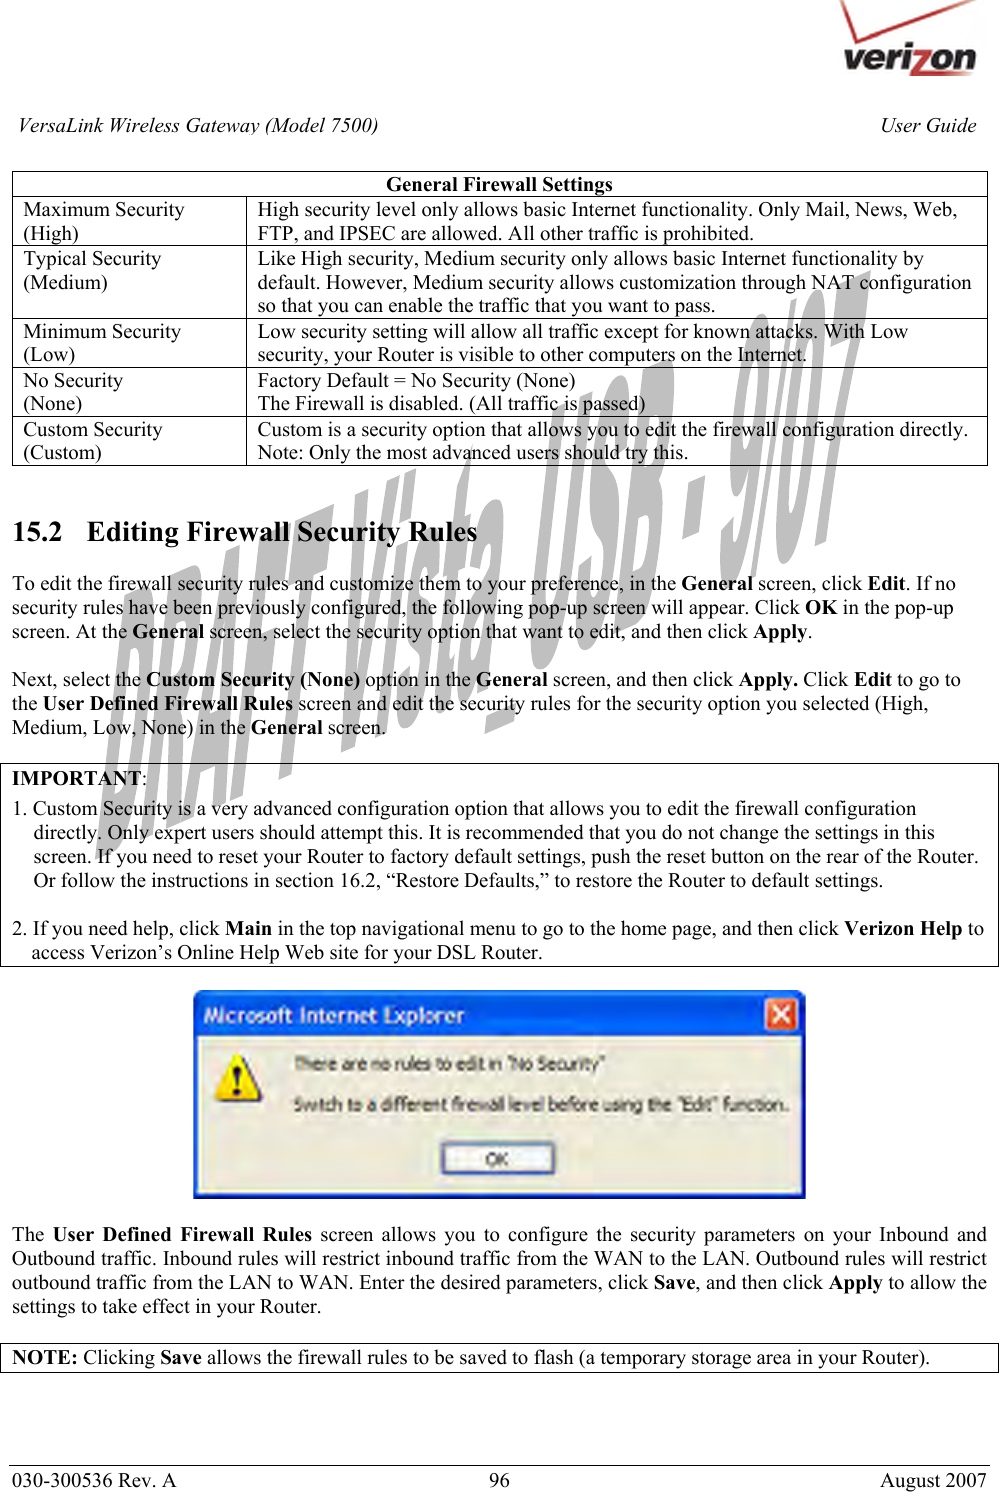       030-300536 Rev. A  96       August 2007 User GuideVersaLink Wireless Gateway (Model 7500) General Firewall Settings Maximum Security (High) High security level only allows basic Internet functionality. Only Mail, News, Web, FTP, and IPSEC are allowed. All other traffic is prohibited. Typical Security (Medium) Like High security, Medium security only allows basic Internet functionality by default. However, Medium security allows customization through NAT configuration so that you can enable the traffic that you want to pass. Minimum Security (Low) Low security setting will allow all traffic except for known attacks. With Low security, your Router is visible to other computers on the Internet. No Security (None)  Factory Default = No Security (None) The Firewall is disabled. (All traffic is passed)  Custom Security (Custom) Custom is a security option that allows you to edit the firewall configuration directly. Note: Only the most advanced users should try this.   15.2   Editing Firewall Security Rules  To edit the firewall security rules and customize them to your preference, in the General screen, click Edit. If no security rules have been previously configured, the following pop-up screen will appear. Click OK in the pop-up screen. At the General screen, select the security option that want to edit, and then click Apply.  Next, select the Custom Security (None) option in the General screen, and then click Apply. Click Edit to go to the User Defined Firewall Rules screen and edit the security rules for the security option you selected (High, Medium, Low, None) in the General screen.  IMPORTANT:  1. Custom Security is a very advanced configuration option that allows you to edit the firewall configuration directly. Only expert users should attempt this. It is recommended that you do not change the settings in this screen. If you need to reset your Router to factory default settings, push the reset button on the rear of the Router. Or follow the instructions in section 16.2, “Restore Defaults,” to restore the Router to default settings.   2. If you need help, click Main in the top navigational menu to go to the home page, and then click Verizon Help to access Verizon’s Online Help Web site for your DSL Router.    The  User Defined Firewall Rules screen allows you to configure the security parameters on your Inbound and Outbound traffic. Inbound rules will restrict inbound traffic from the WAN to the LAN. Outbound rules will restrict outbound traffic from the LAN to WAN. Enter the desired parameters, click Save, and then click Apply to allow the settings to take effect in your Router.   NOTE: Clicking Save allows the firewall rules to be saved to flash (a temporary storage area in your Router).    